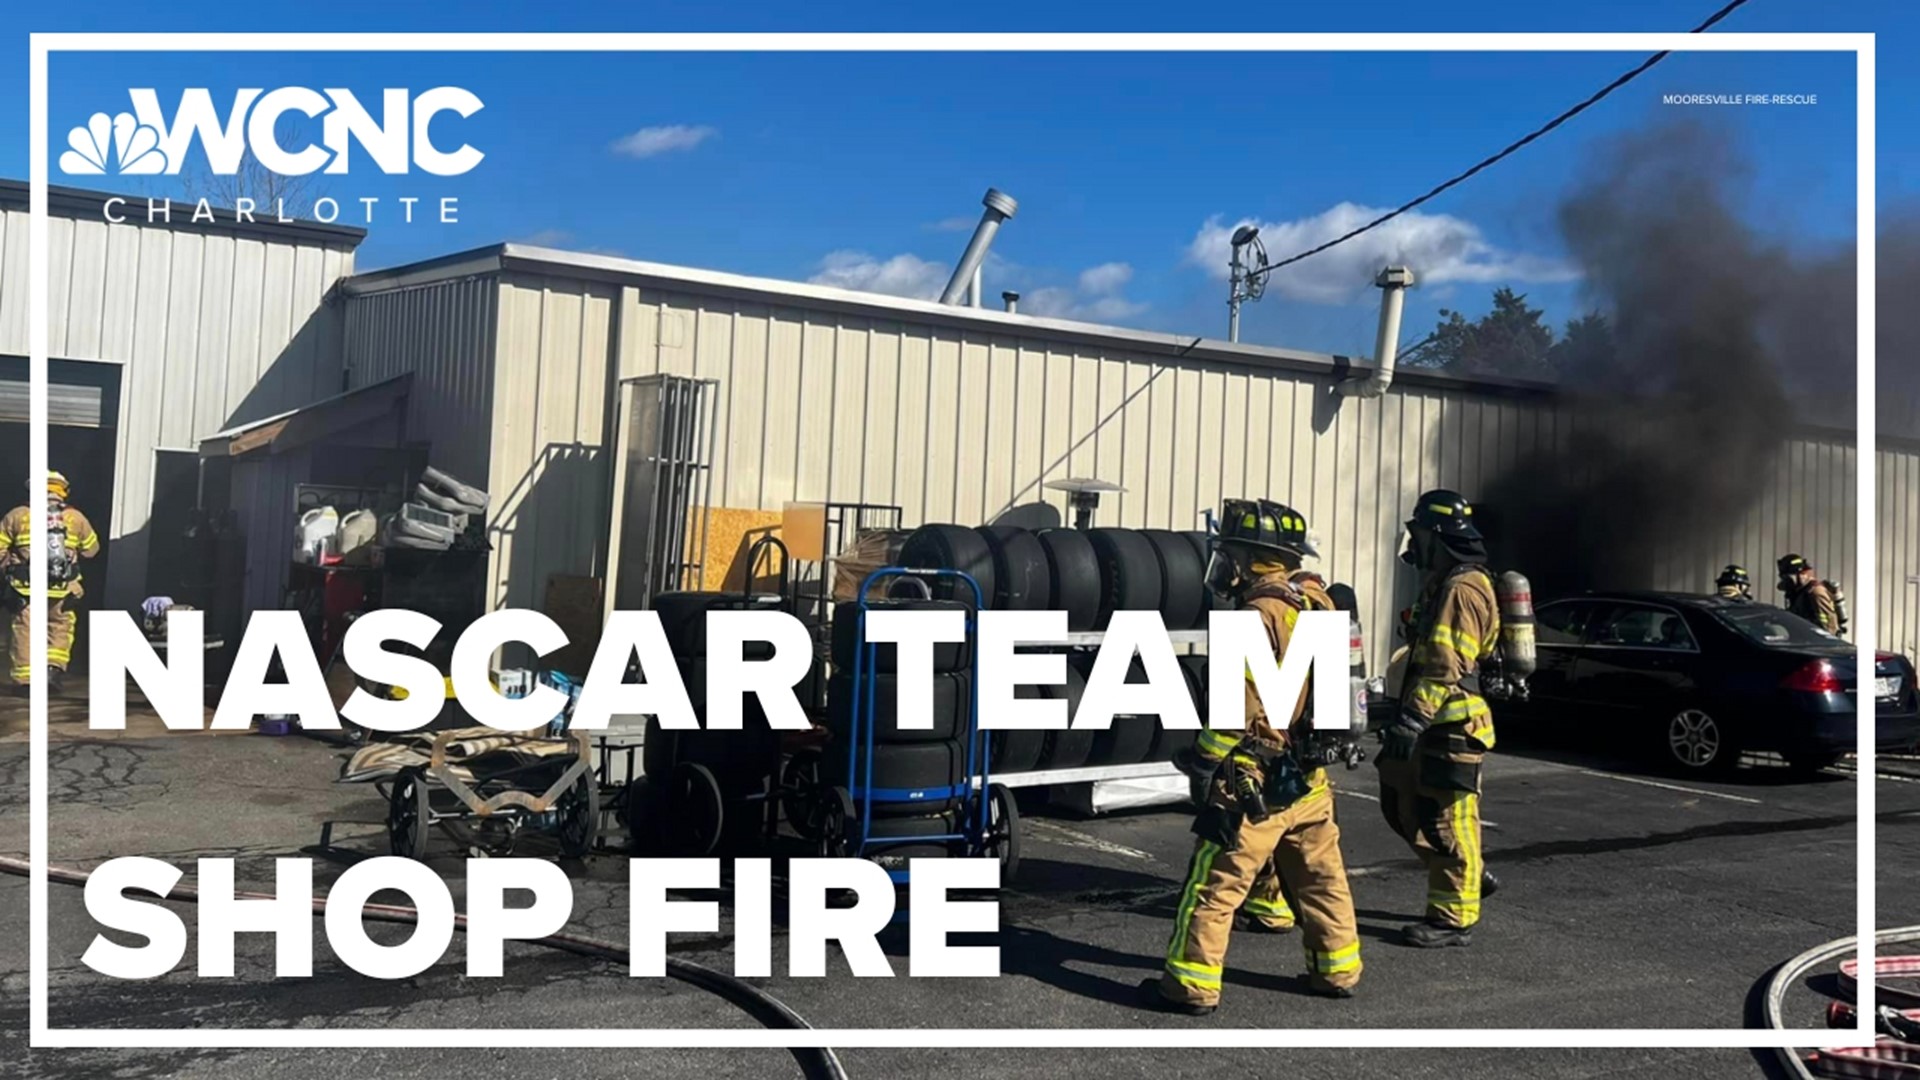 Multiple team members were hurt during a large fire at the Reaume Brothers Racing shop in Mooresville, officials said.